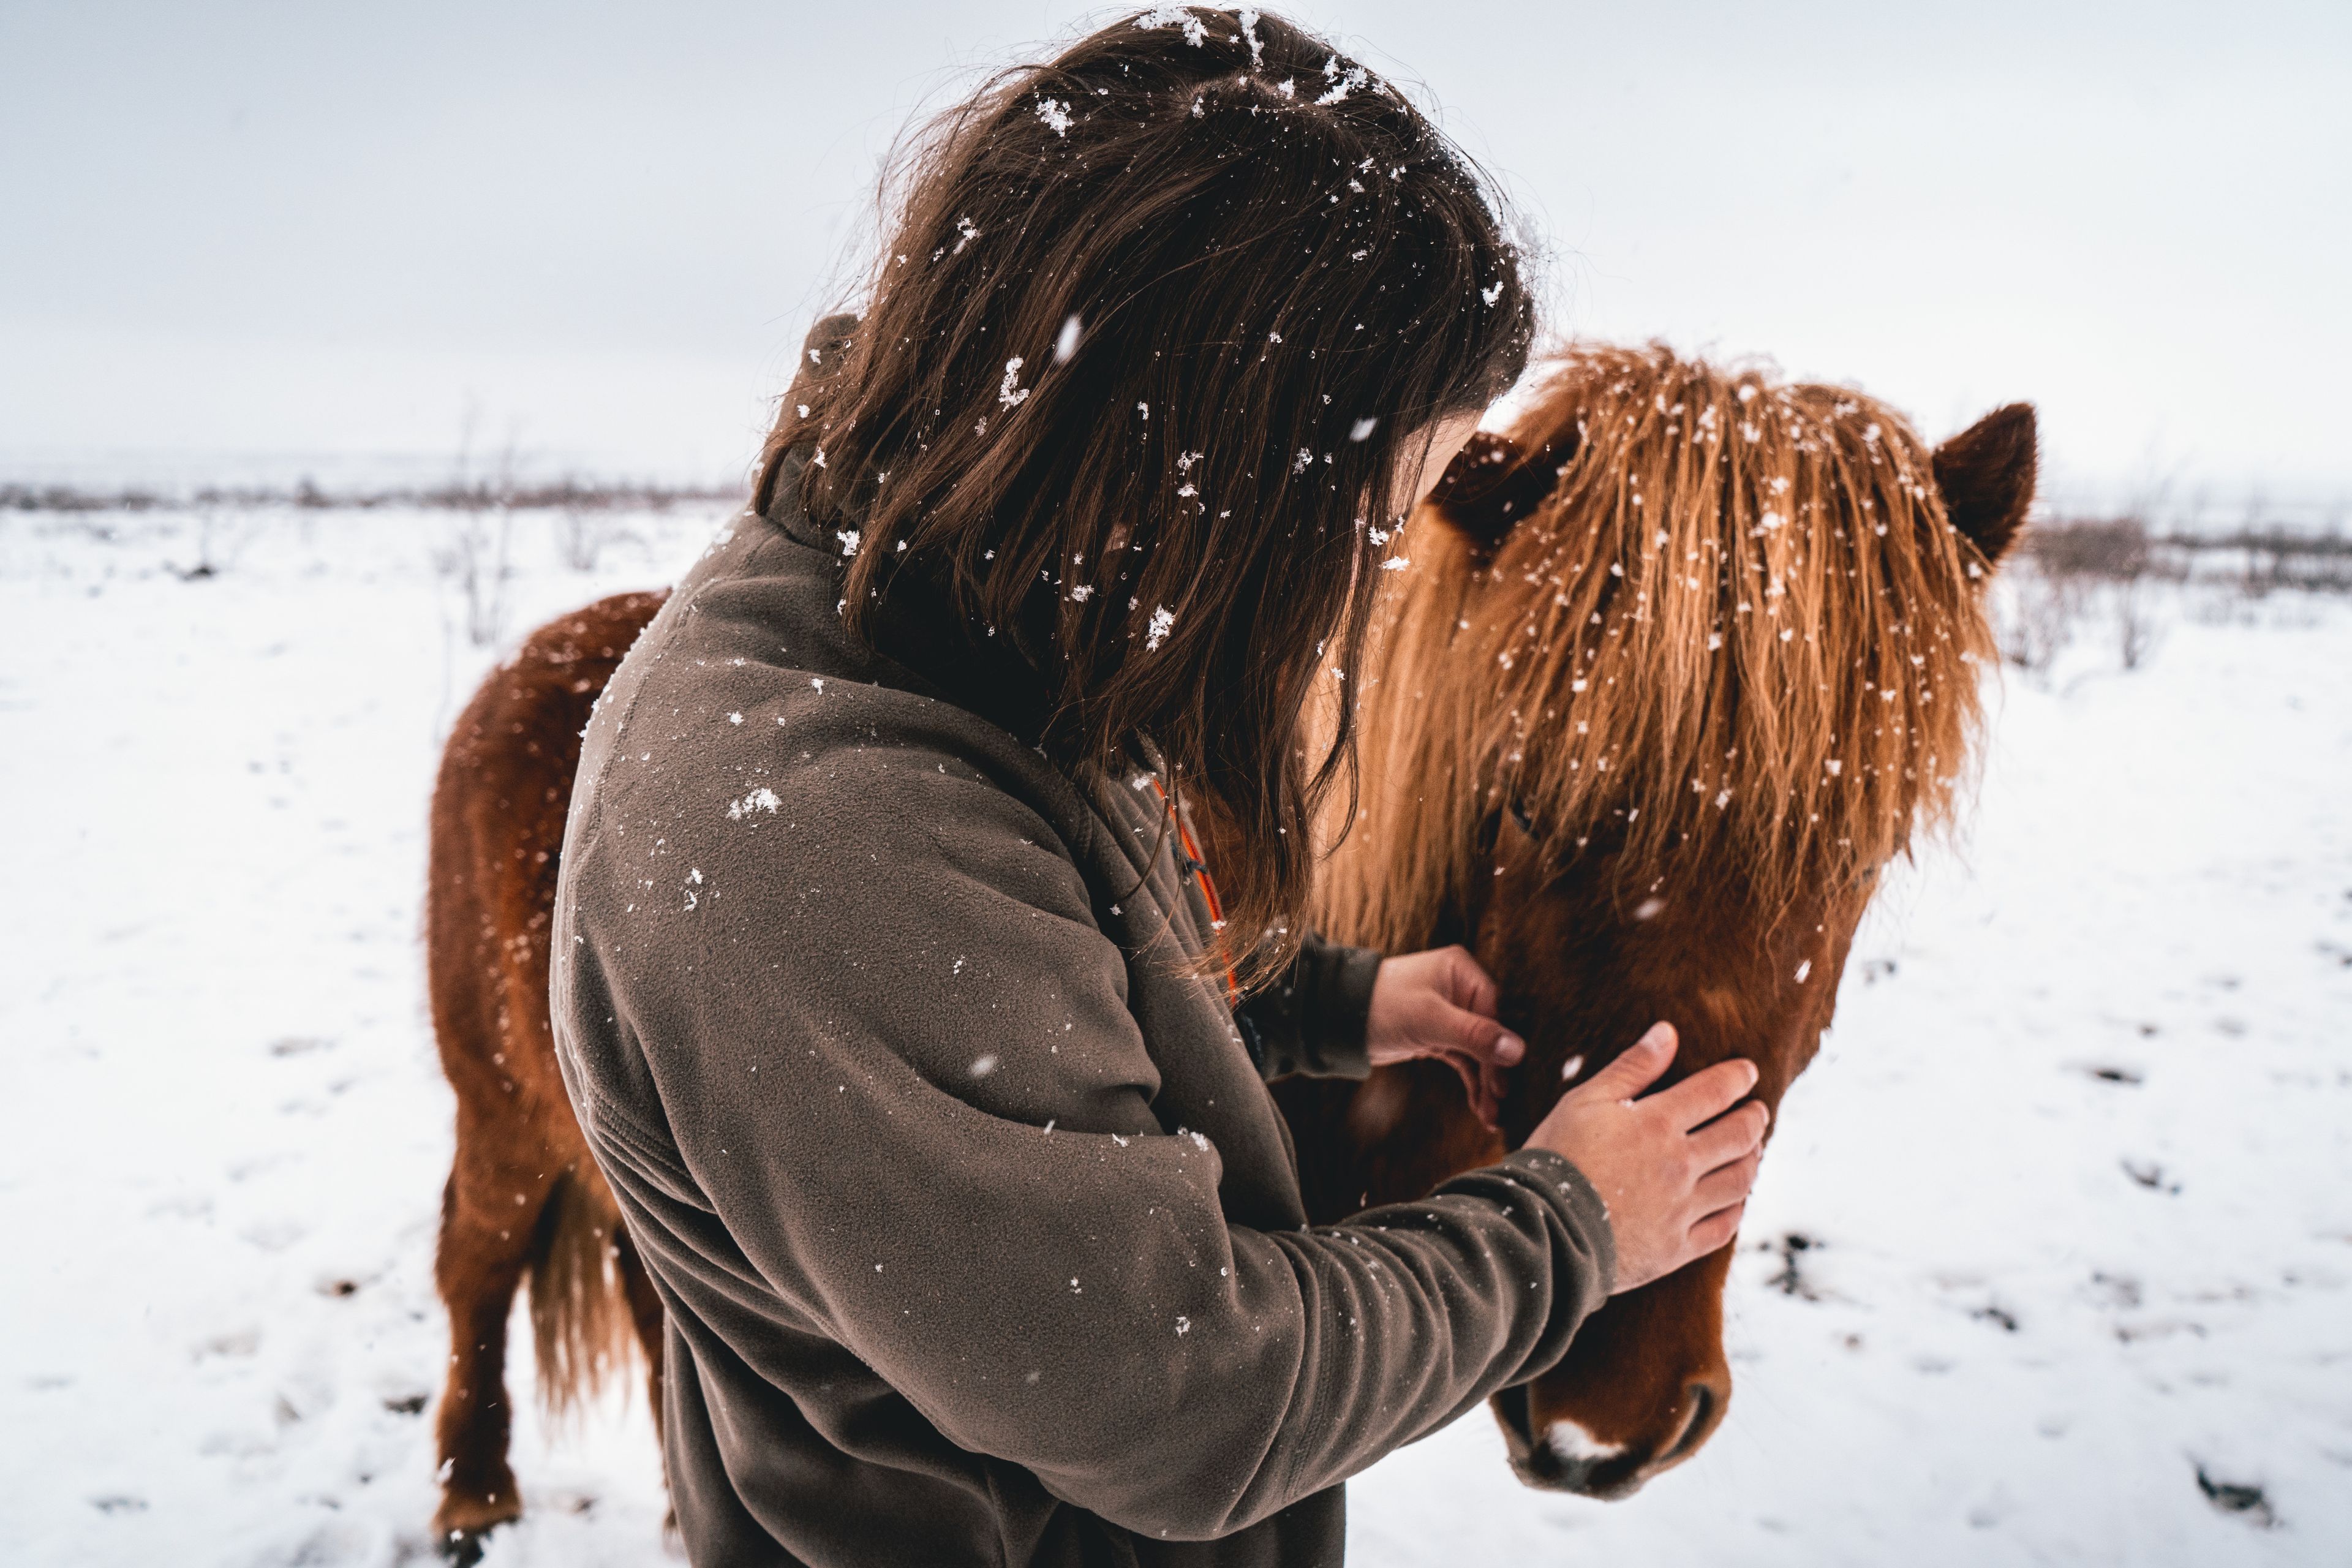 iceland weather winter conditions during january horseback riding